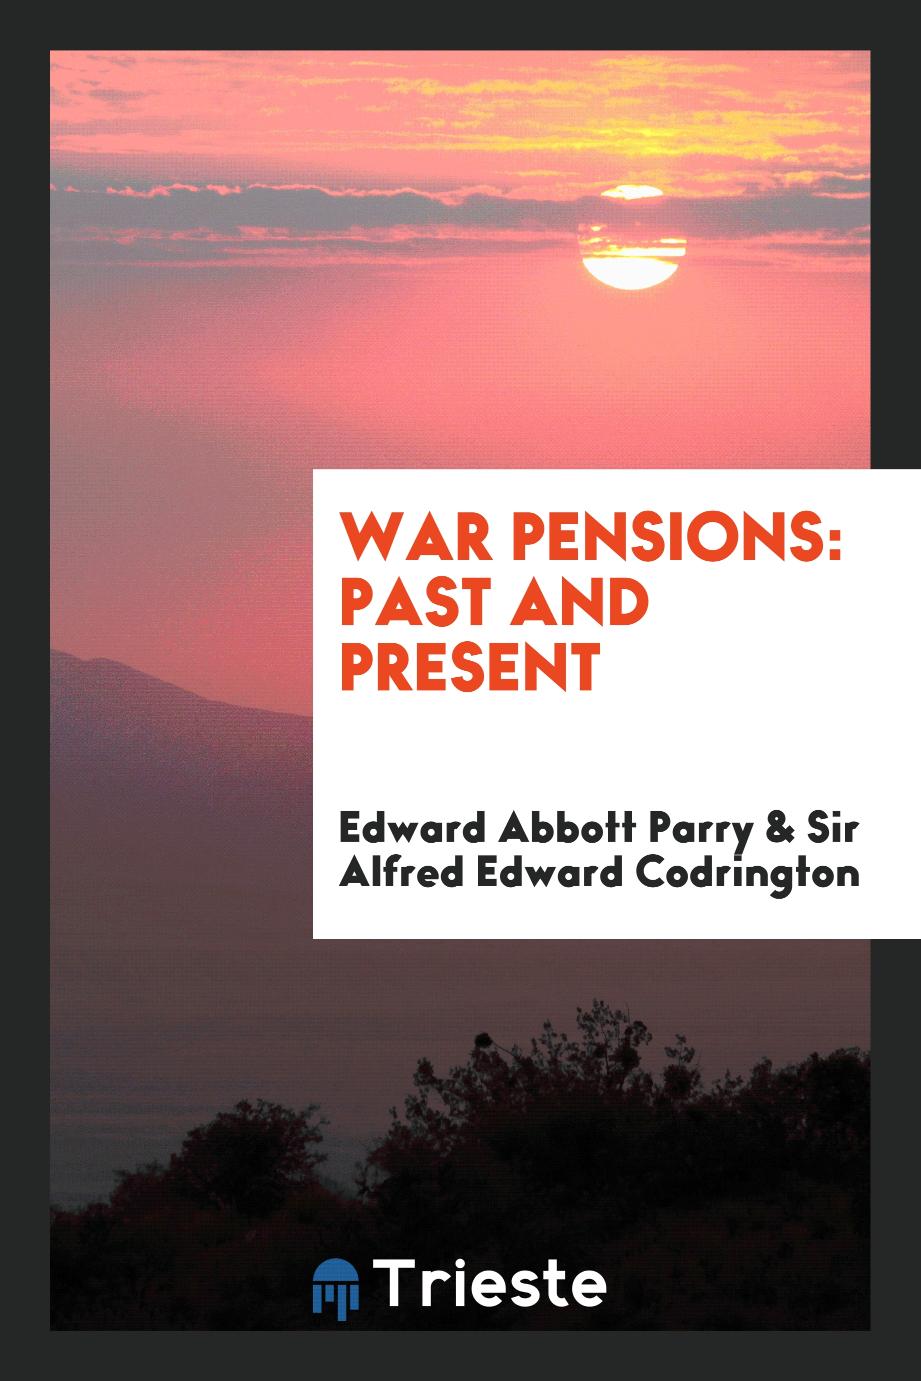 War pensions: past and present